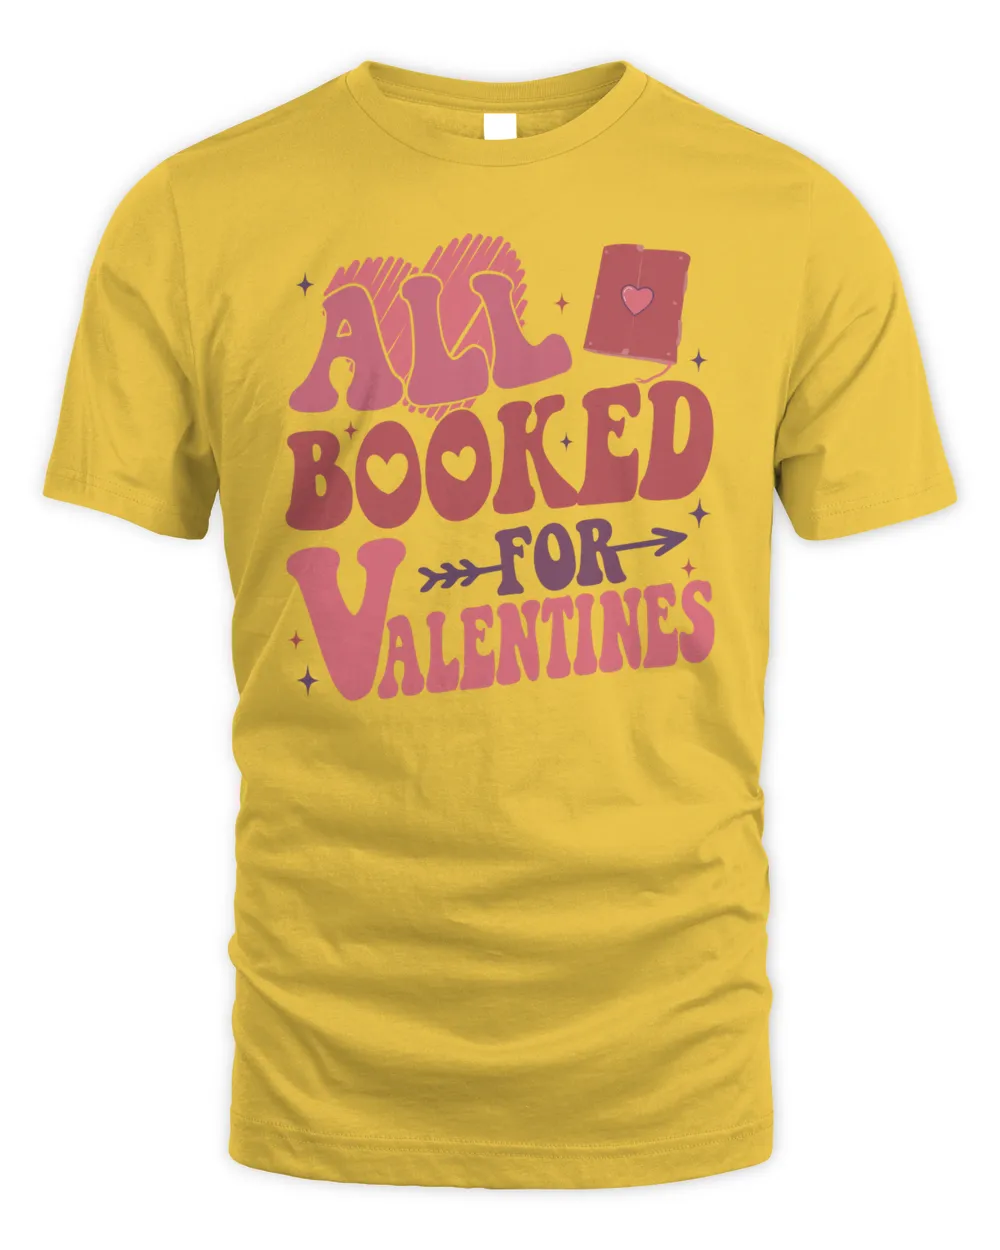 All Booked For Valentines Sweatshirt, Hoodies, Tote Bag, Canvas